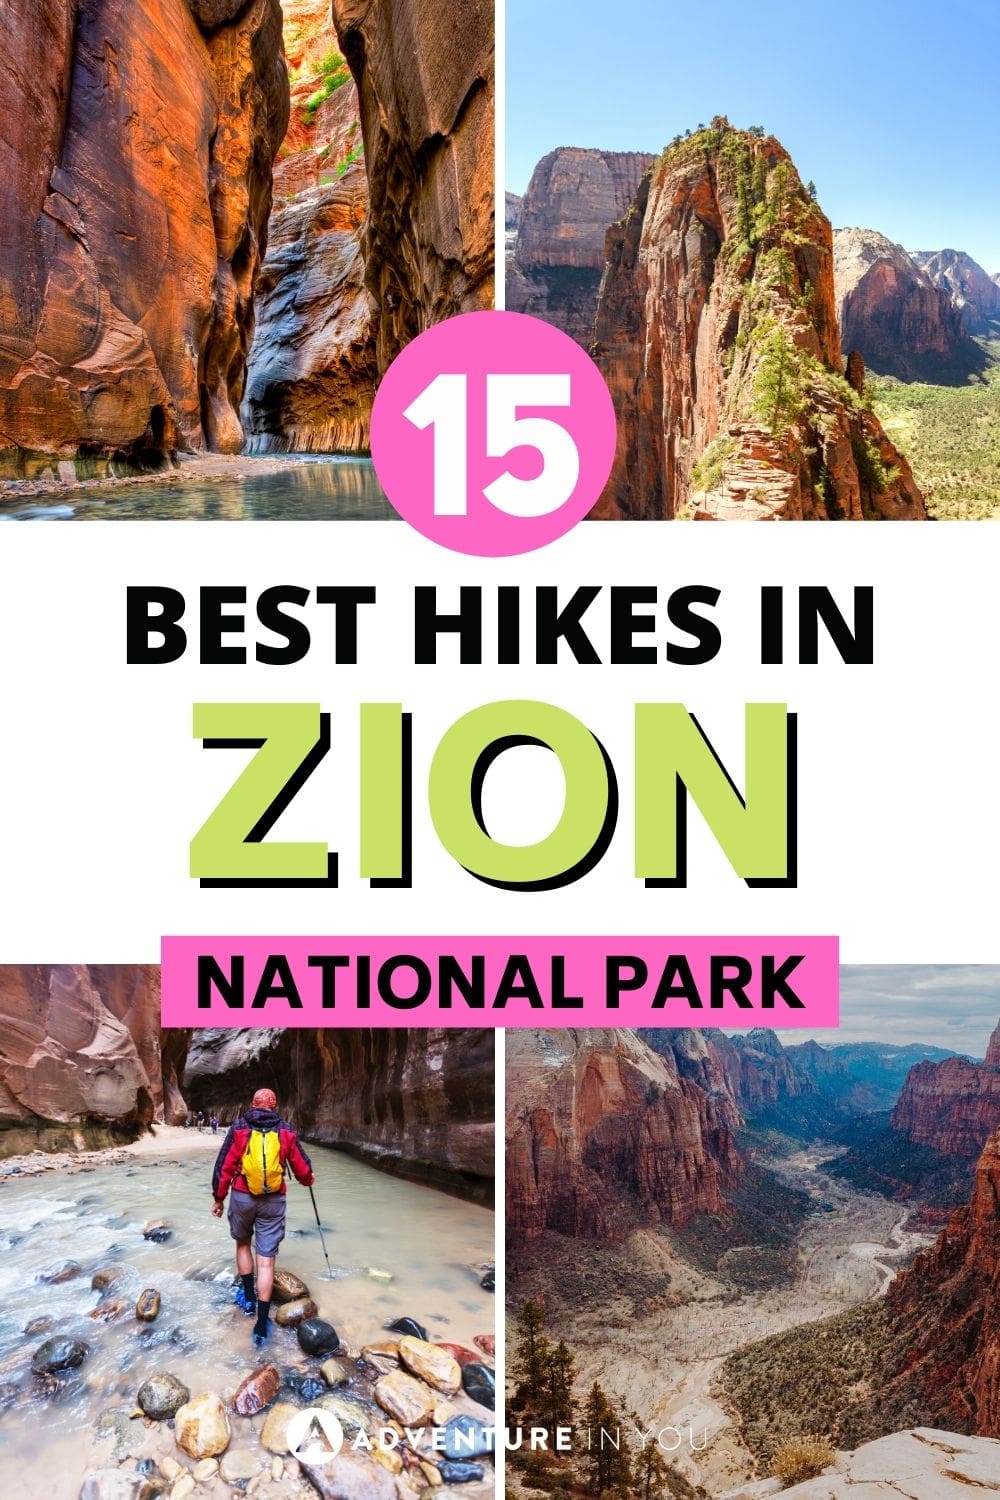 Best Hike in Zion | If you're taking a holiday in Utah, check out these 15 hikes to add to your itinerary! #zion #zionnationalpark #visitutah #stgeorgeutah